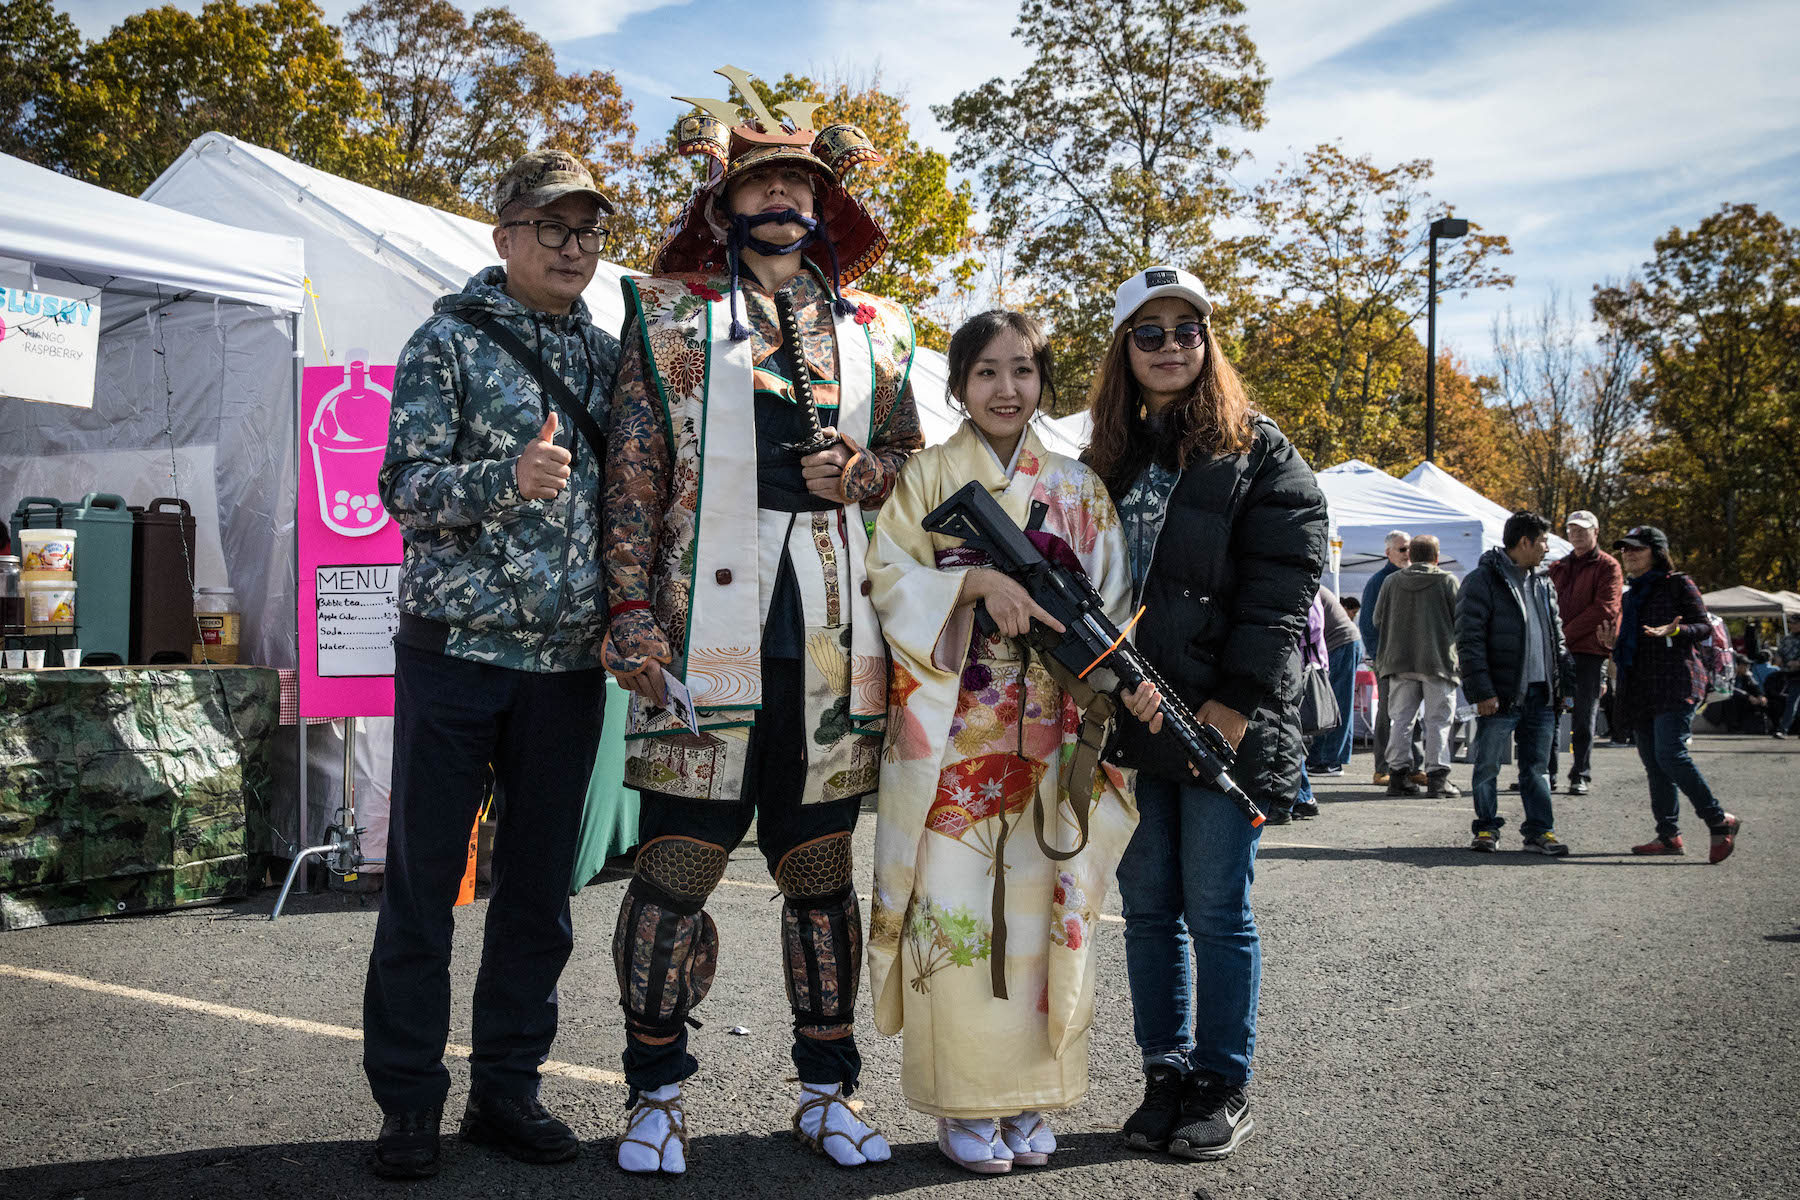 Guests at the festival were invited to dress up in kimonos and Samurai outfits, complete with AR-15's, and pose for photos.